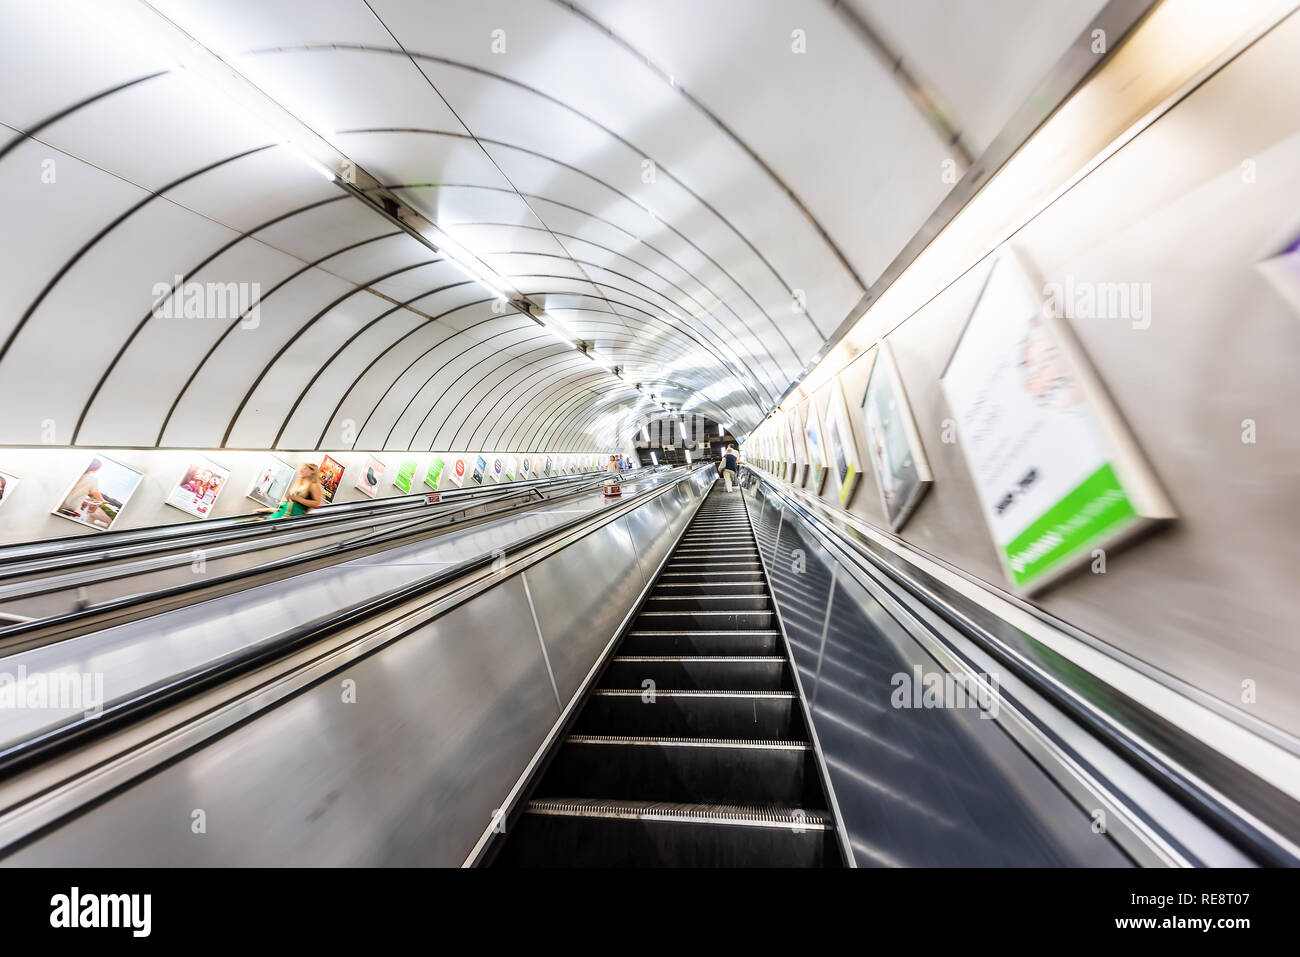 London, UK - June 26, 2018: People riding escalator up and down standing in Underground tube metro in Pimlico Victoria area of city through tunnel Stock Photo